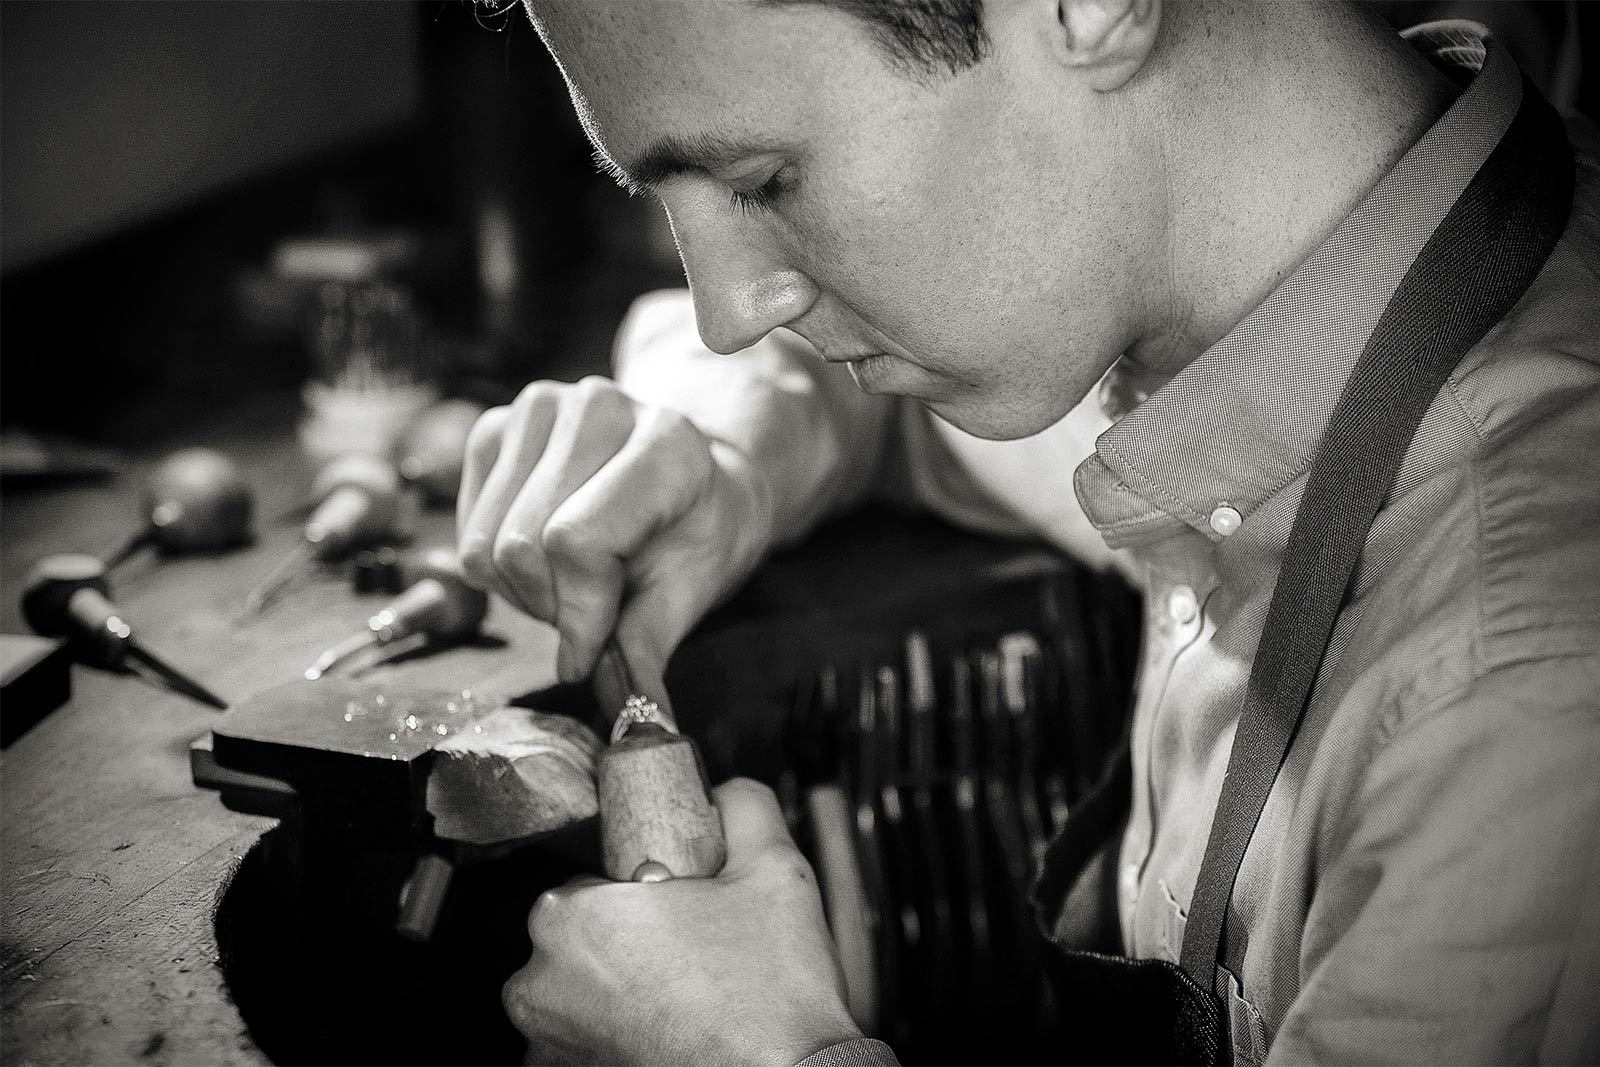 Auckland jewellery designers Julian Bartrom specialising in custom jewellery and custom made engagement ring design